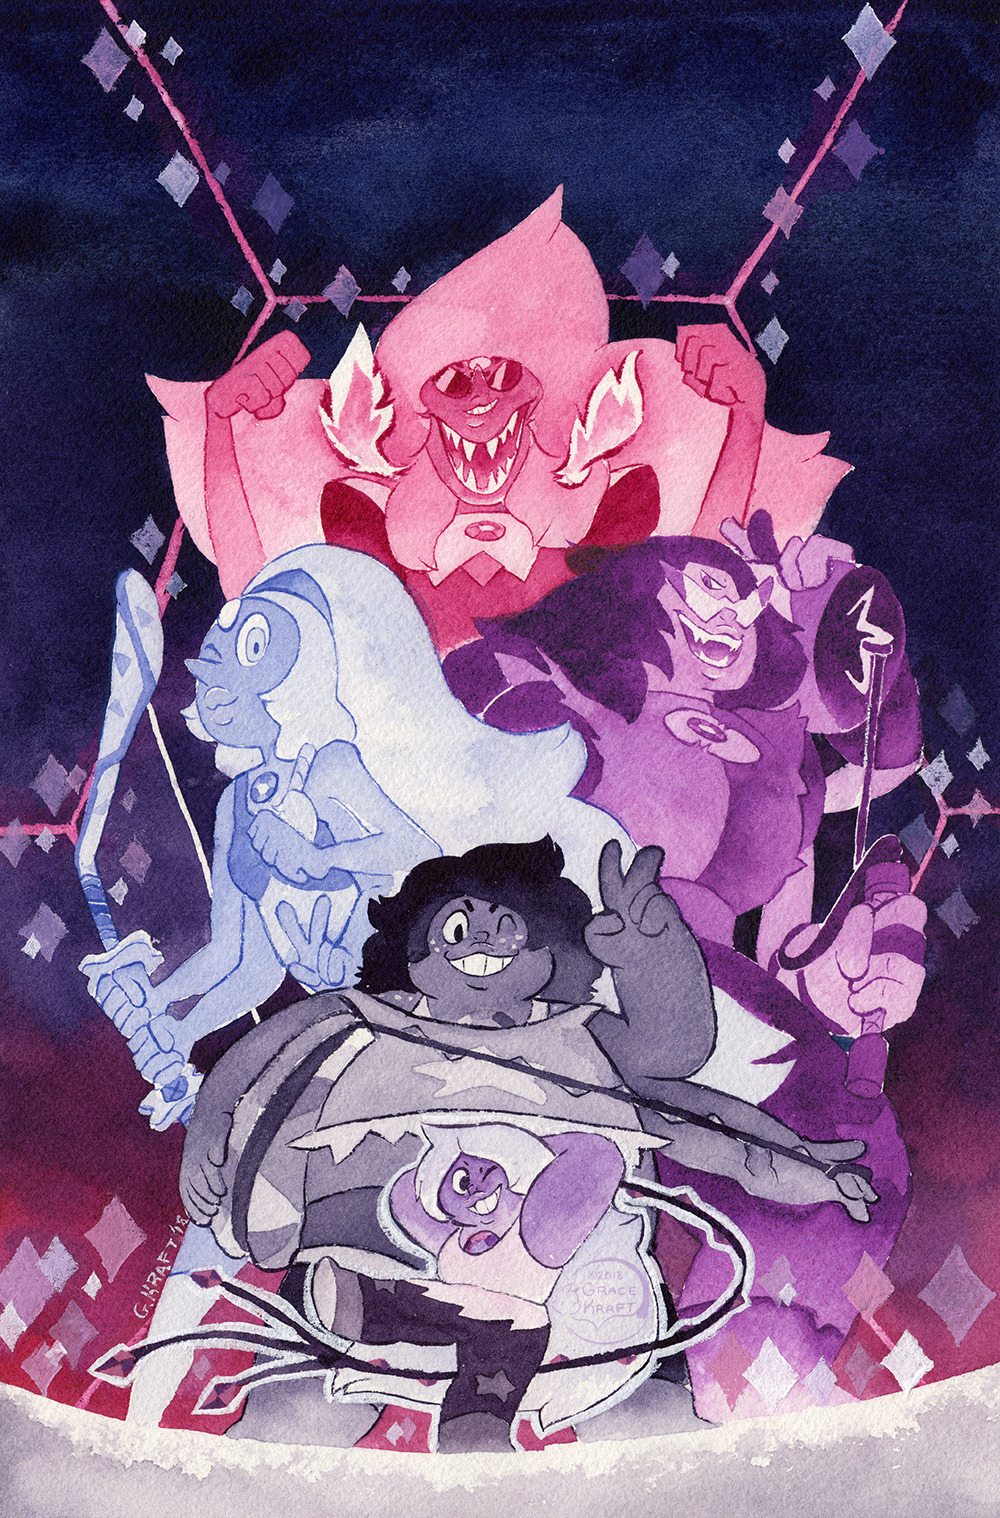 Now that Steven Universe #16 has been announced, I can finally reveal the cover I did for it!  It’s been a while since I last made one so it was fun to be able to do it again.

 I was inspired by that part in the Digimon Tamer’s opening where you see the Rookie Digimon and all the Digimon they become.  I wanted to do an Amethyst cover and thought it would be fun to take that concept and use it to show all the fusions Amethyst is a component in.  I had a lot of fun making it, especially in figuring out the colors.